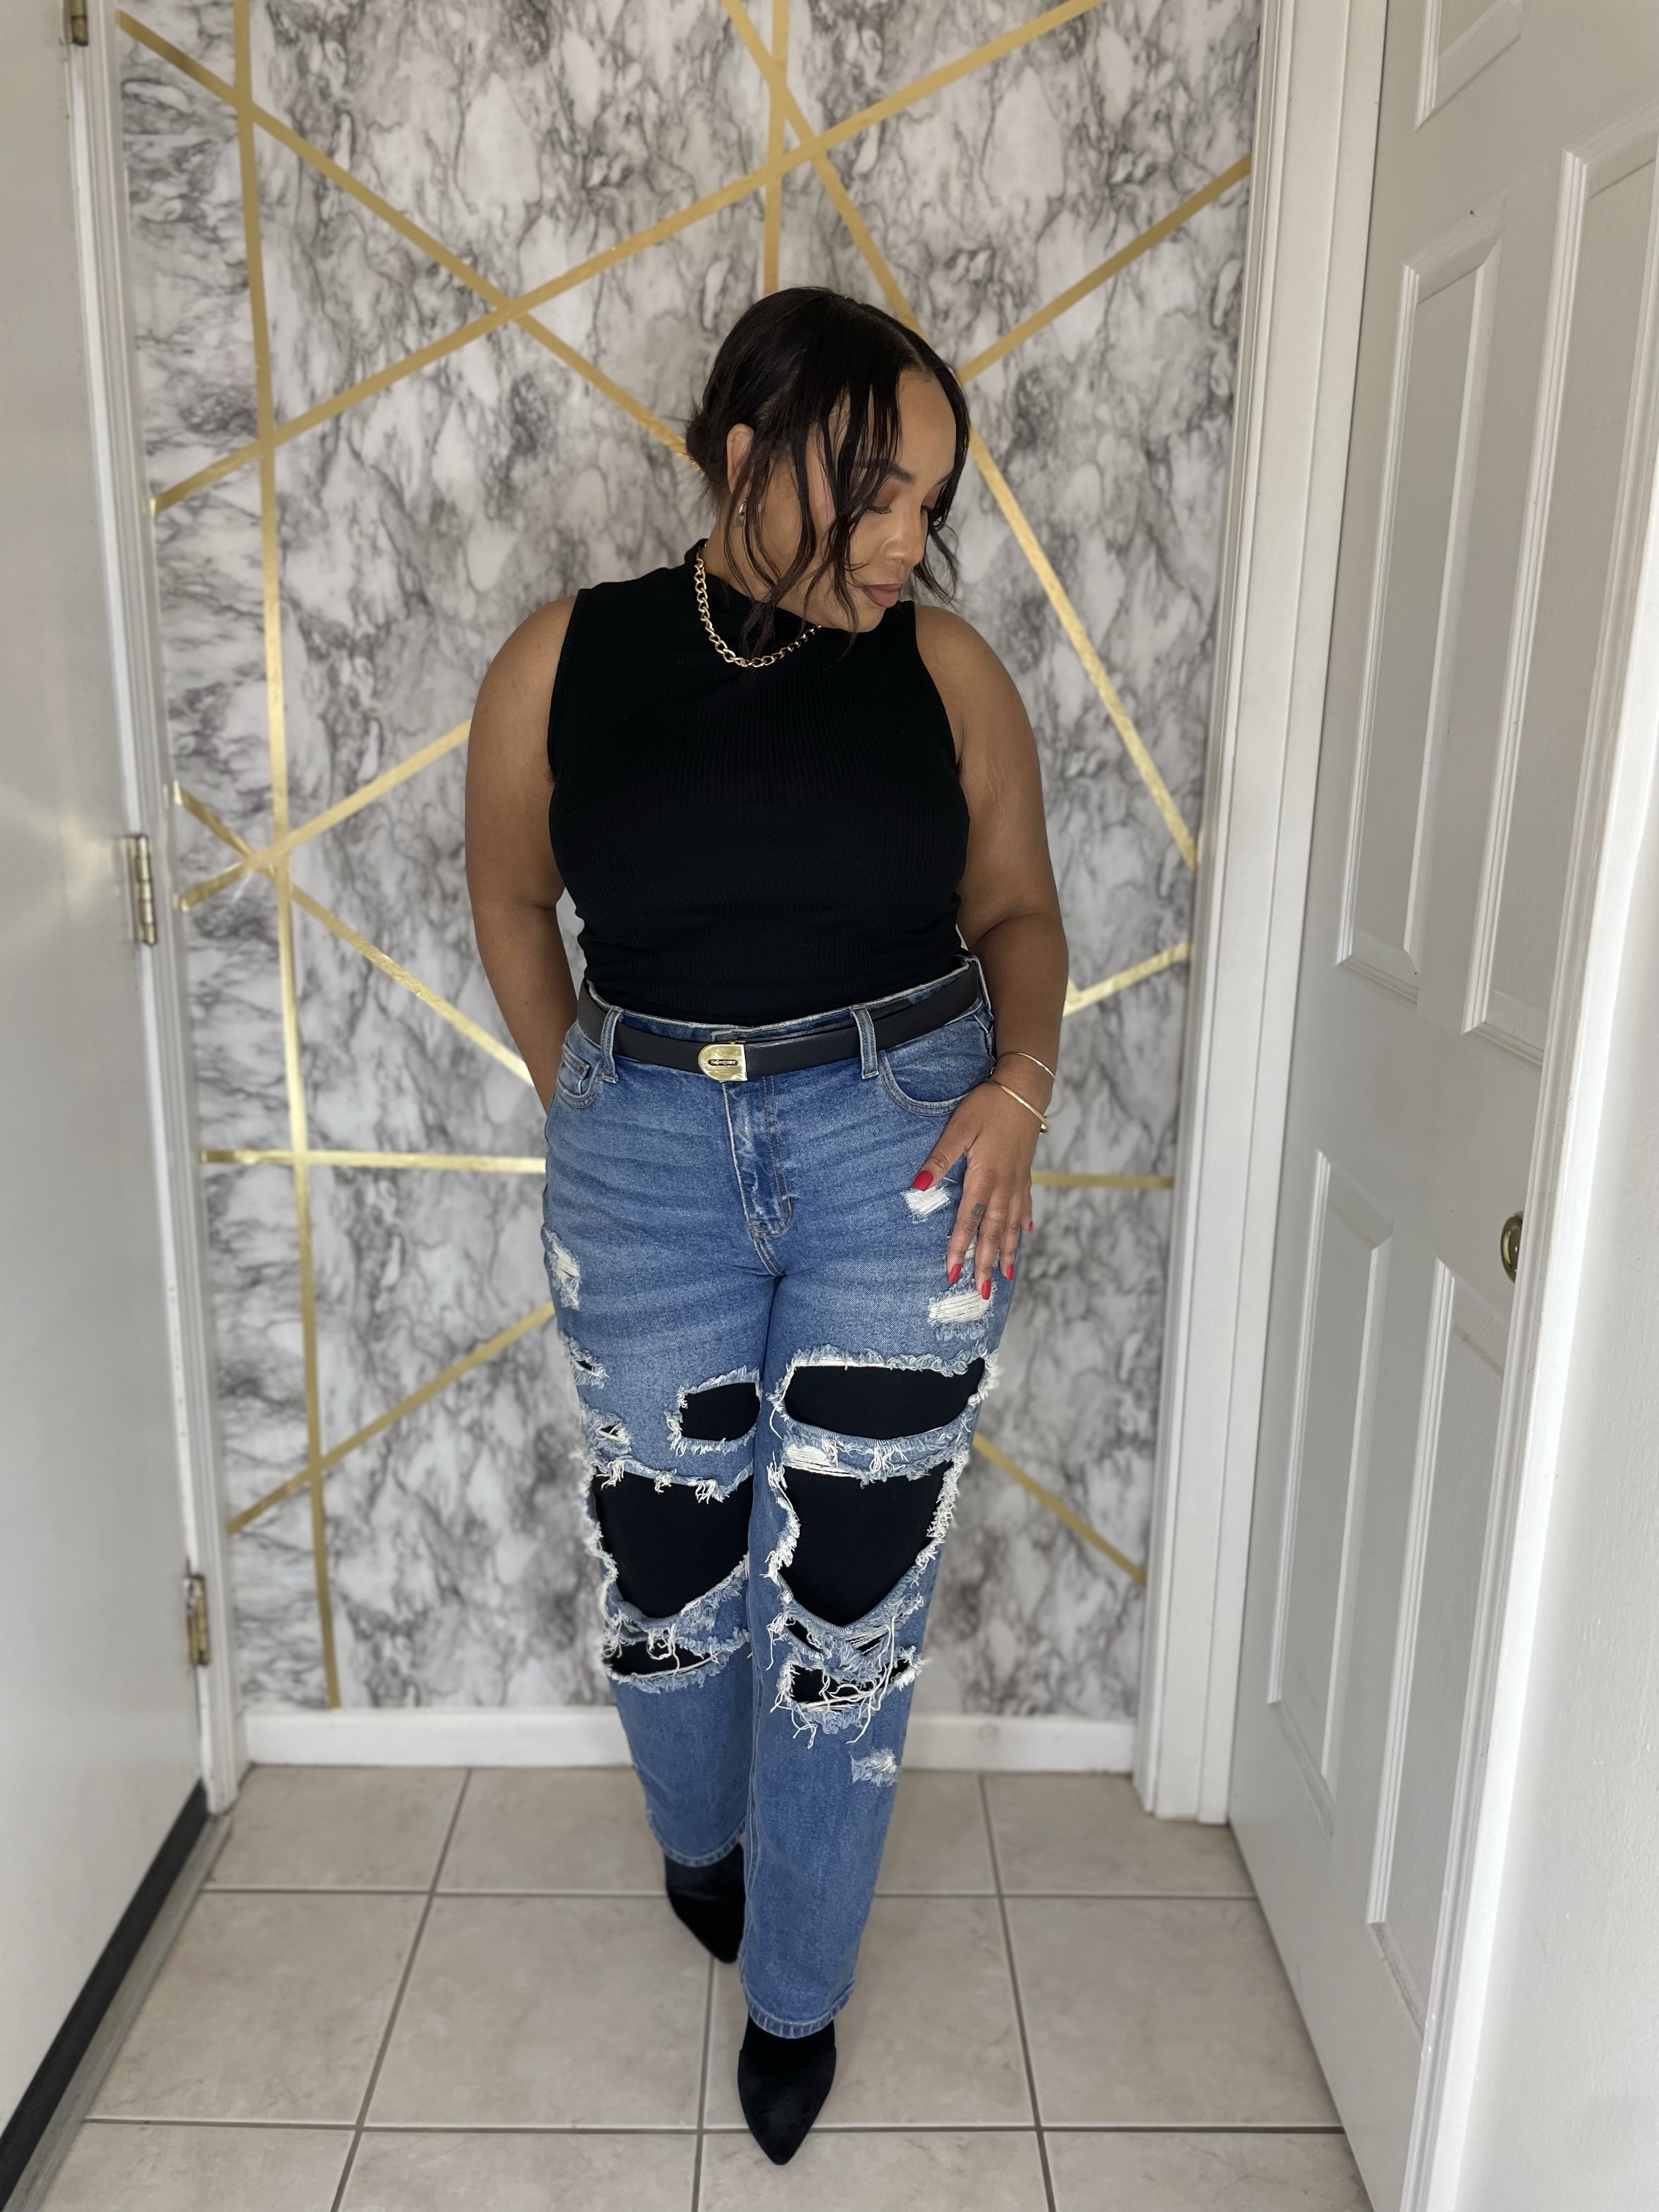 pinterest outfits, recreating pinterest outfits, recreating pinterest outfits from Shein, that girl outfit ideas, that girl aesthetic, Spring 2023 outfits, Summer 2023 outfits, lifestyle blogger aesthetic, black girl fashion, black women fashion, high value woman aesthetic